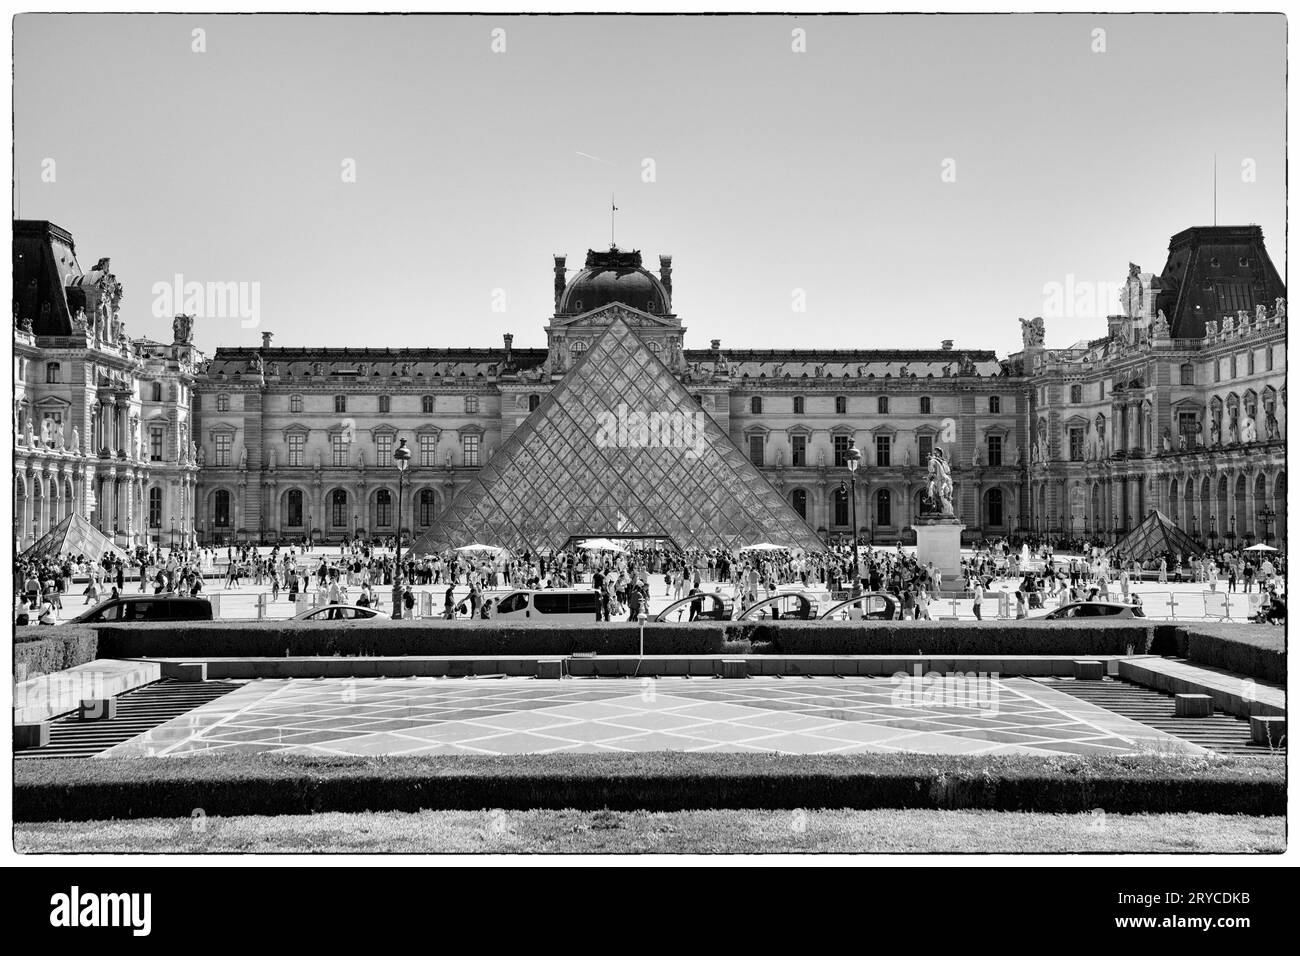 World famous Love Museum pyramid acoss the courtyard. Paris, France Stock Photo